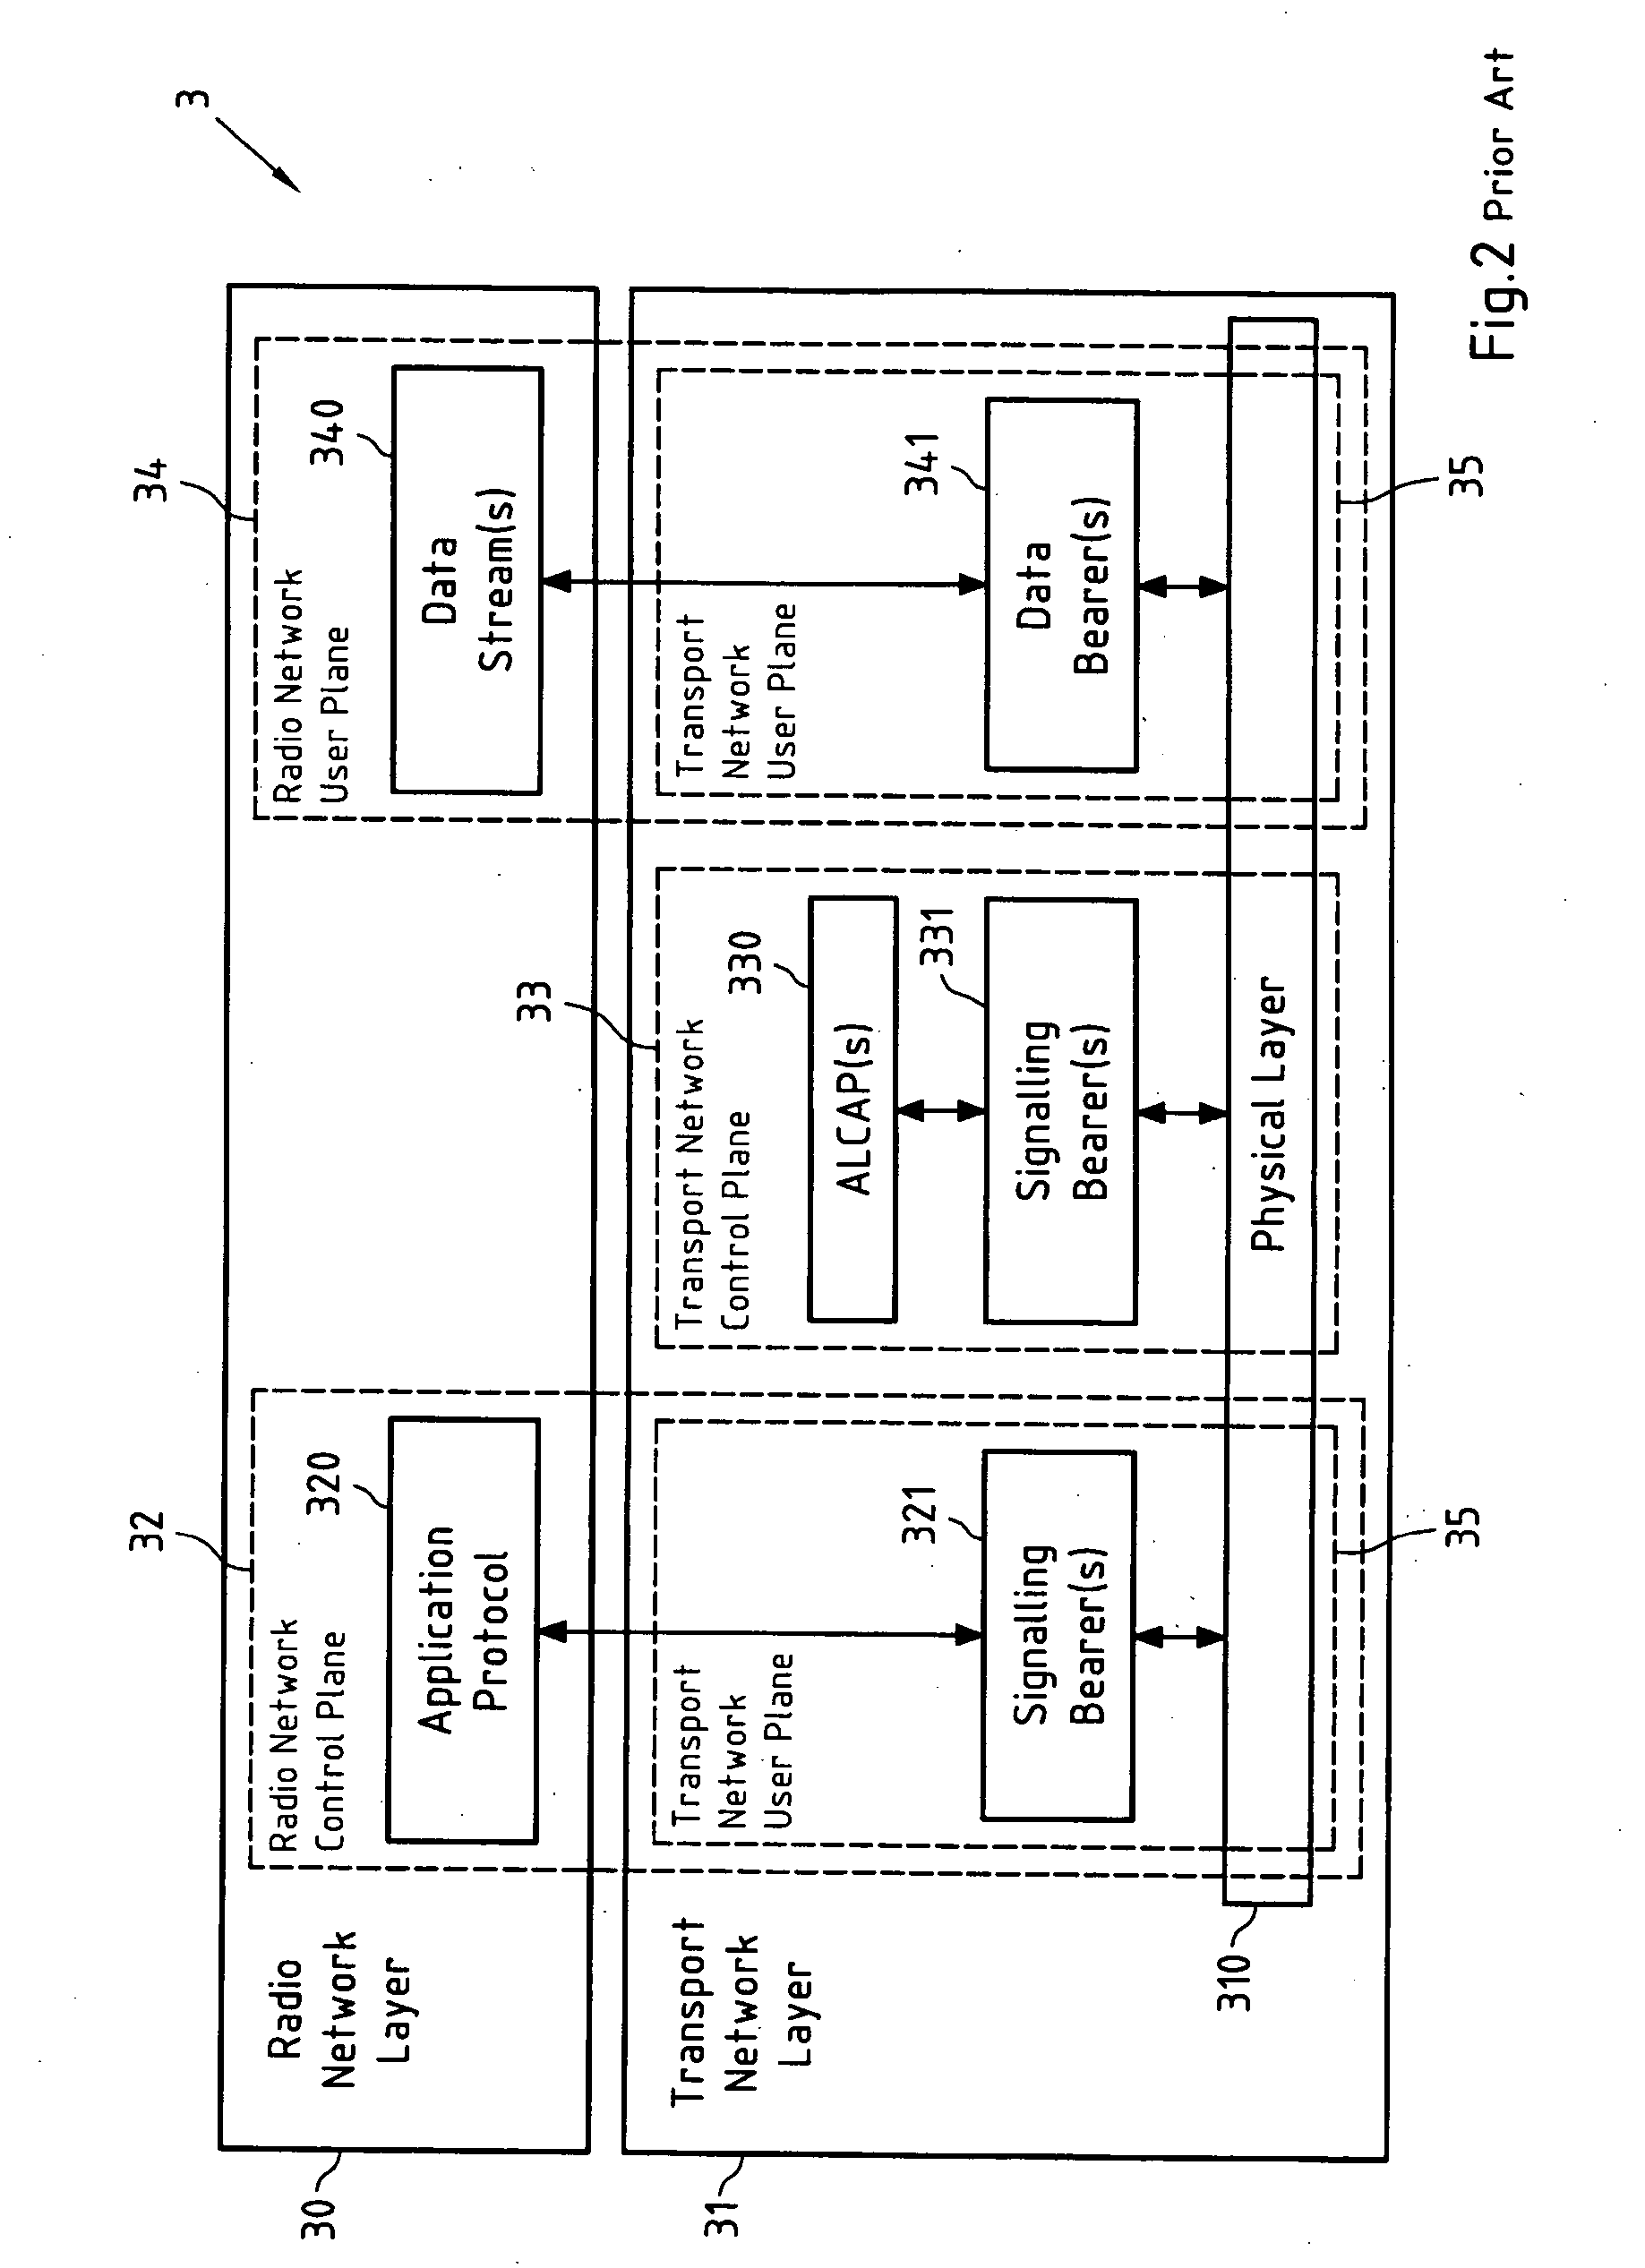 Deployment of different physical layer protocols in a radio access network